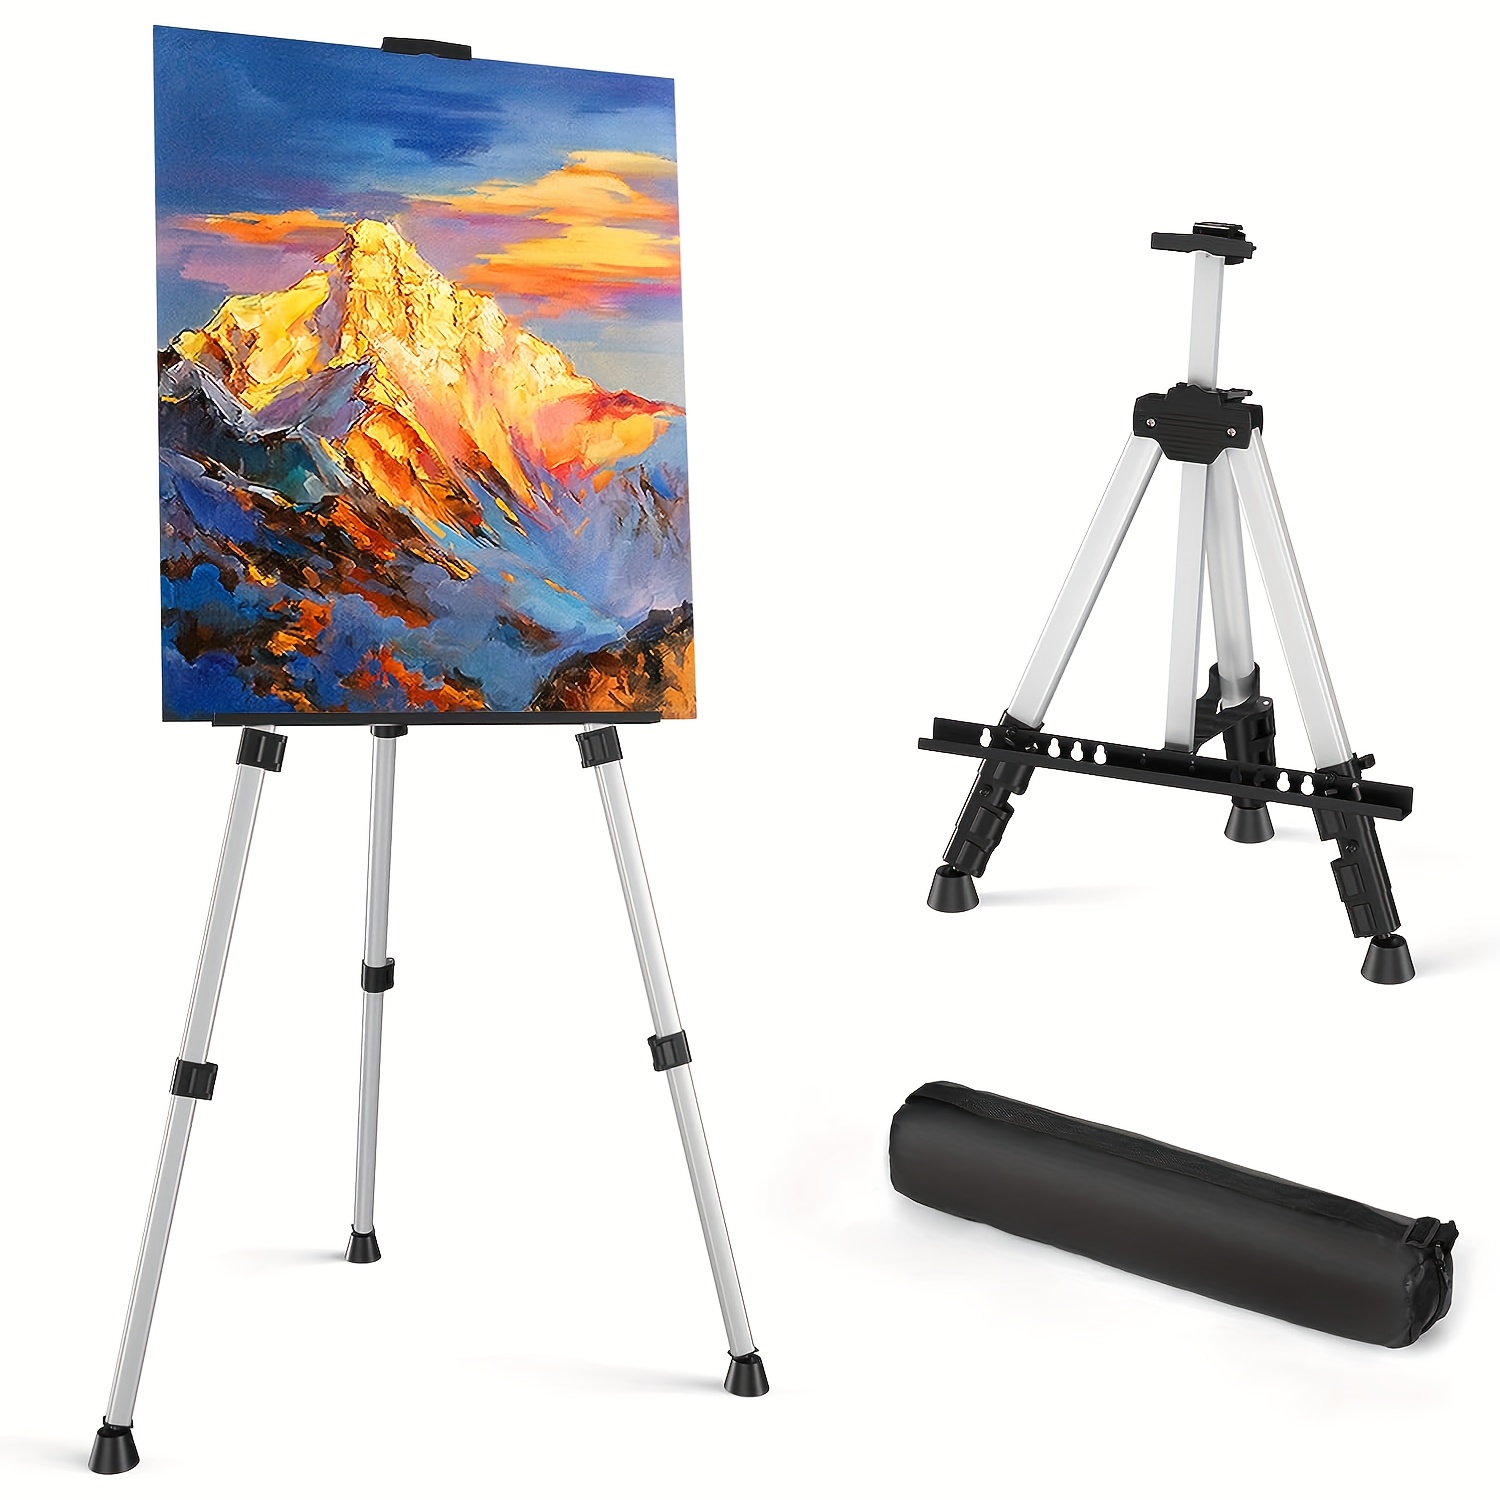 8 High Small Black Wood Display Easel (6 Pack), A-Frame Artist Painting  Party Tripod Mini Easel - Tabletop Holder Stand for Canvases, Kids Crafts